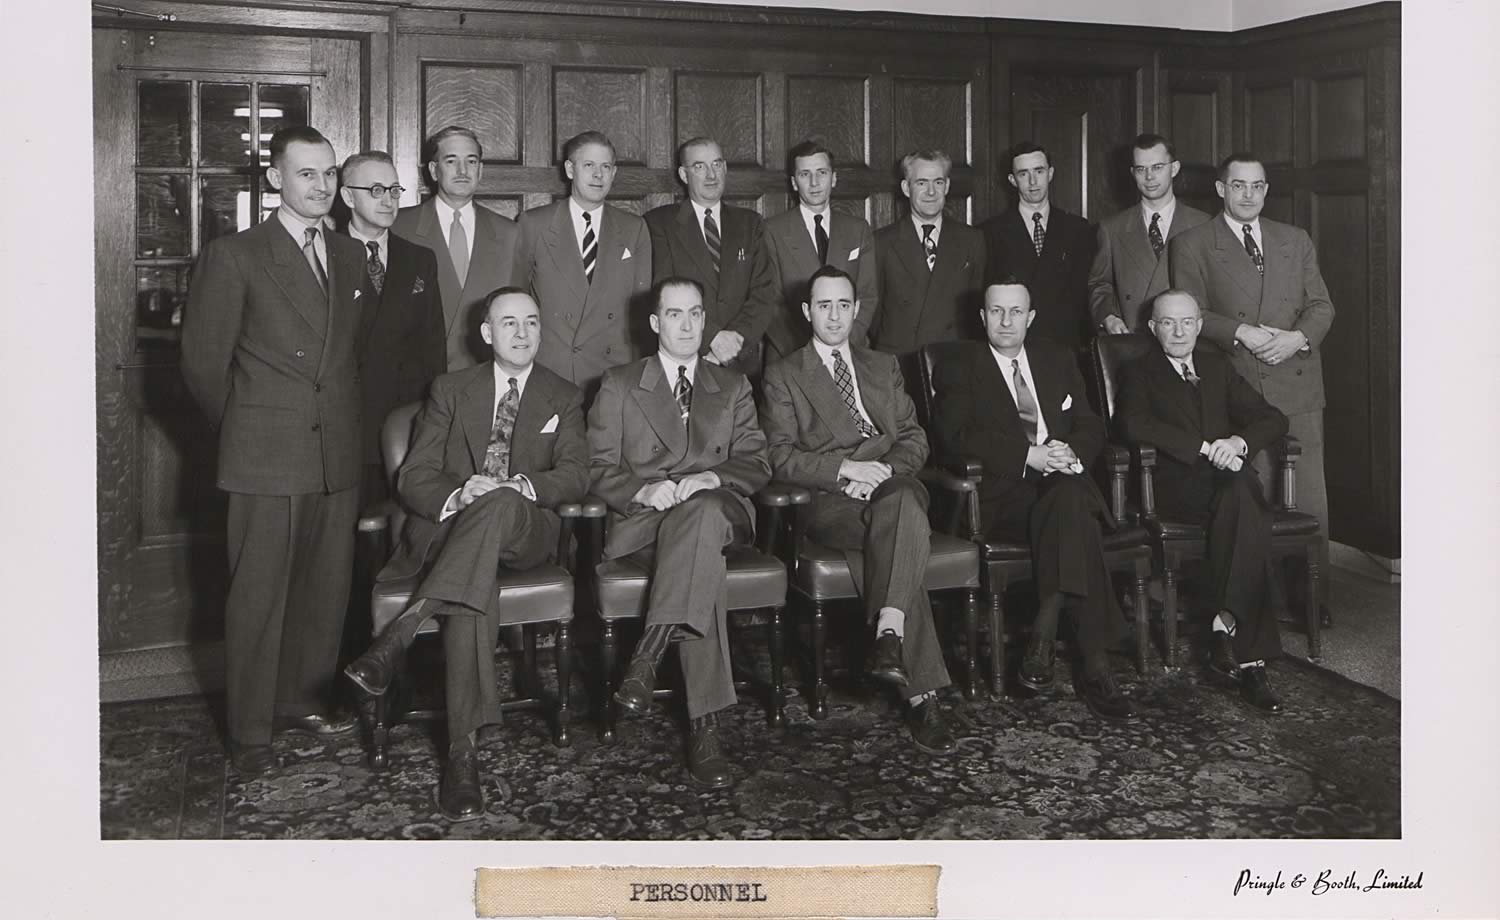 Formal black and white photograph a group of men. All the men are dressed in suits; the first row are seated, the second row are standing behind them.